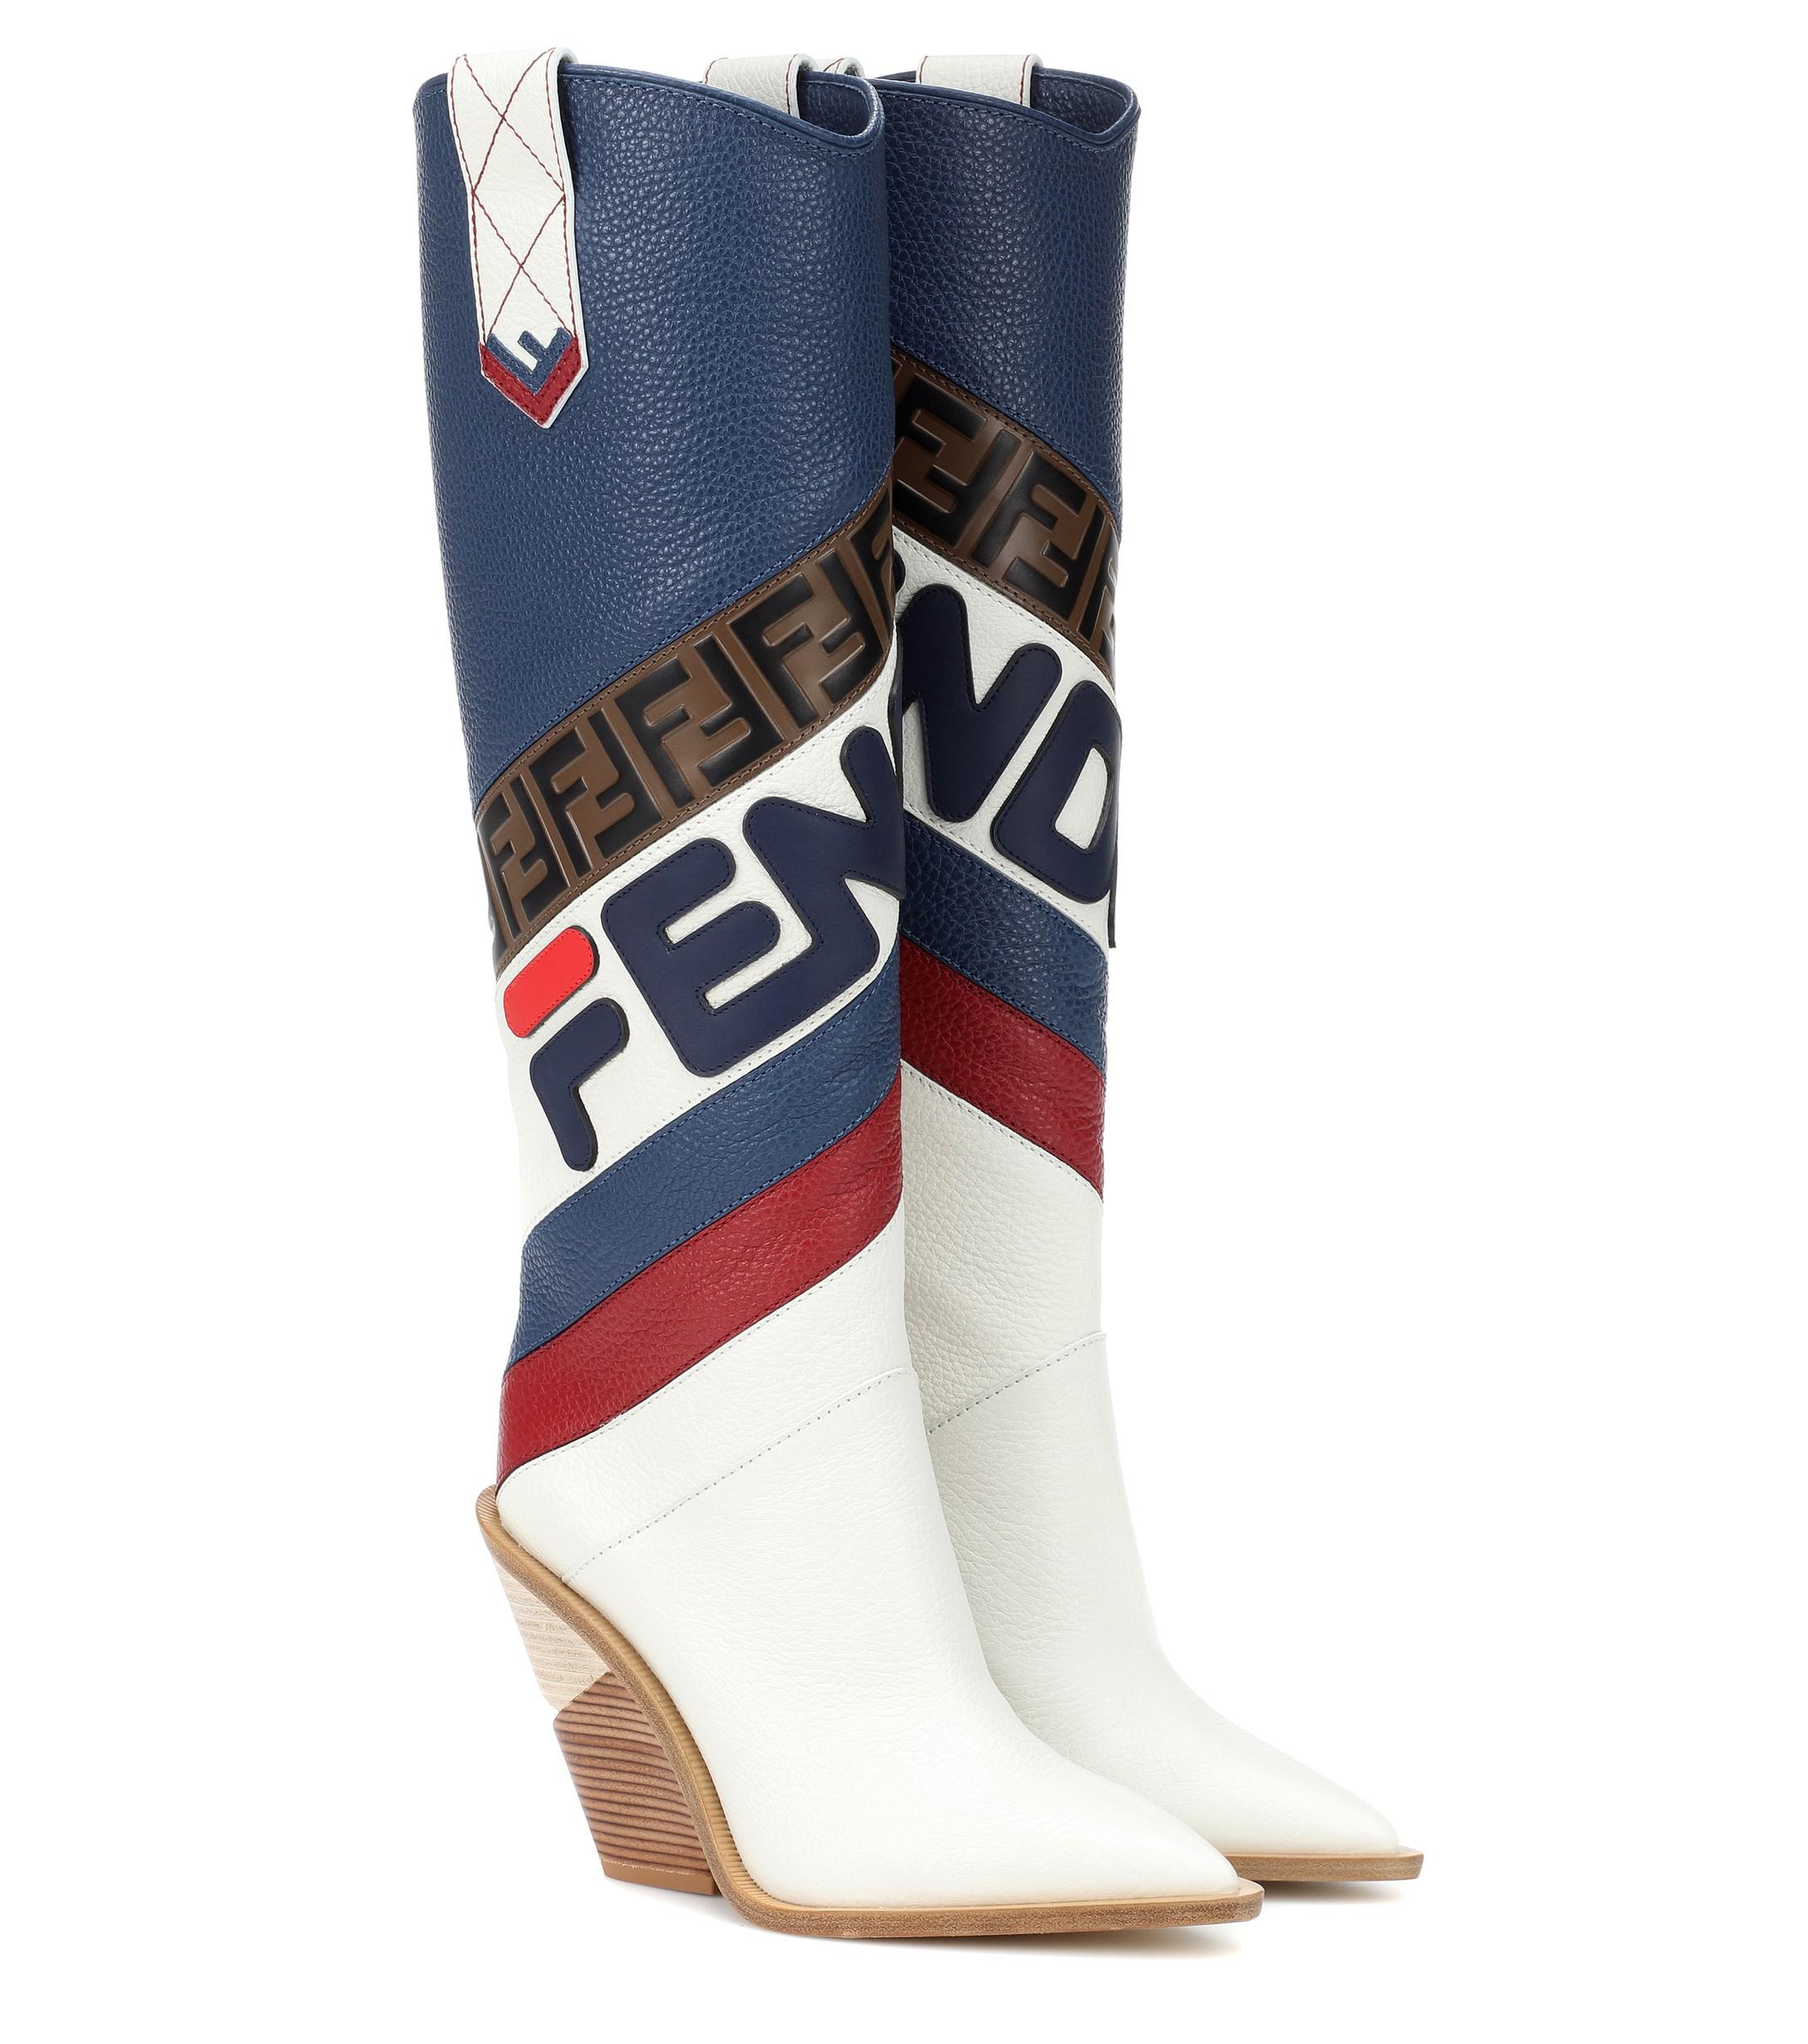 Fendi Mania Leather Knee-high Boots in Blue | Lyst